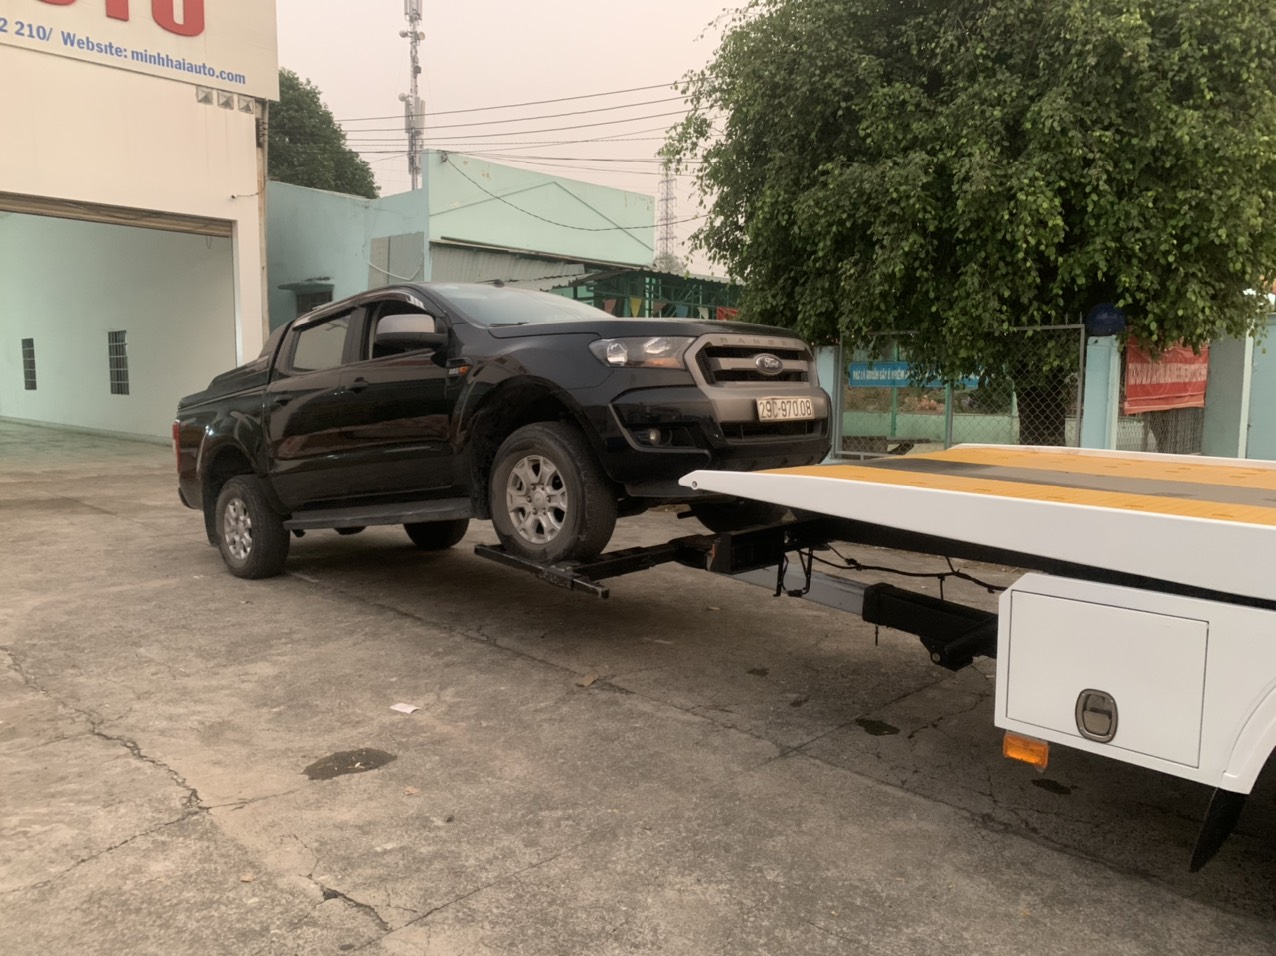 Flatbed wheel lift tow truck: high safety devices